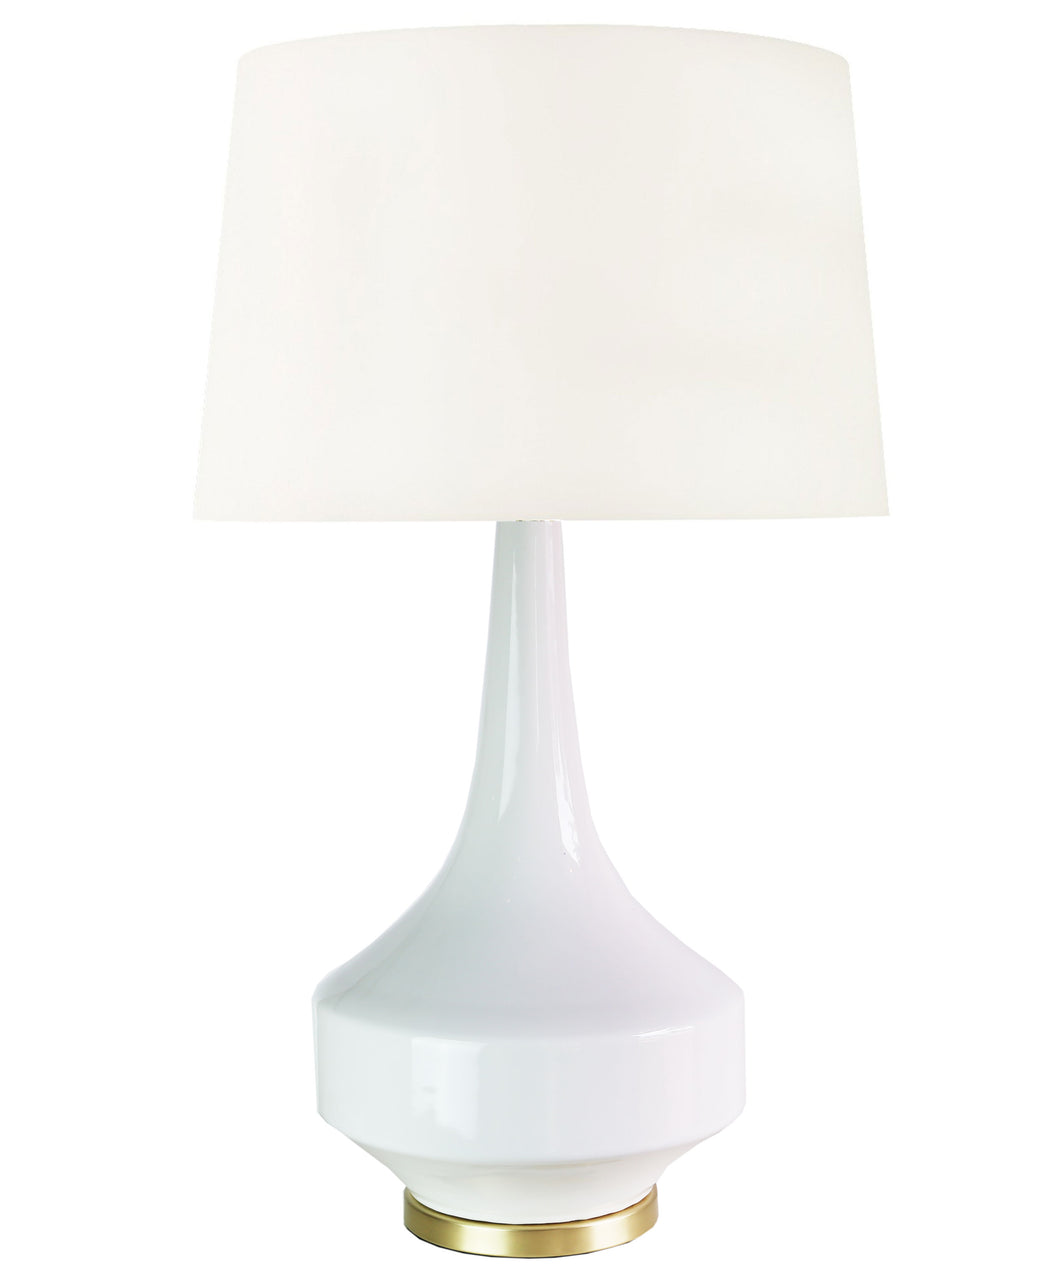 Anderson Table Lamp, White